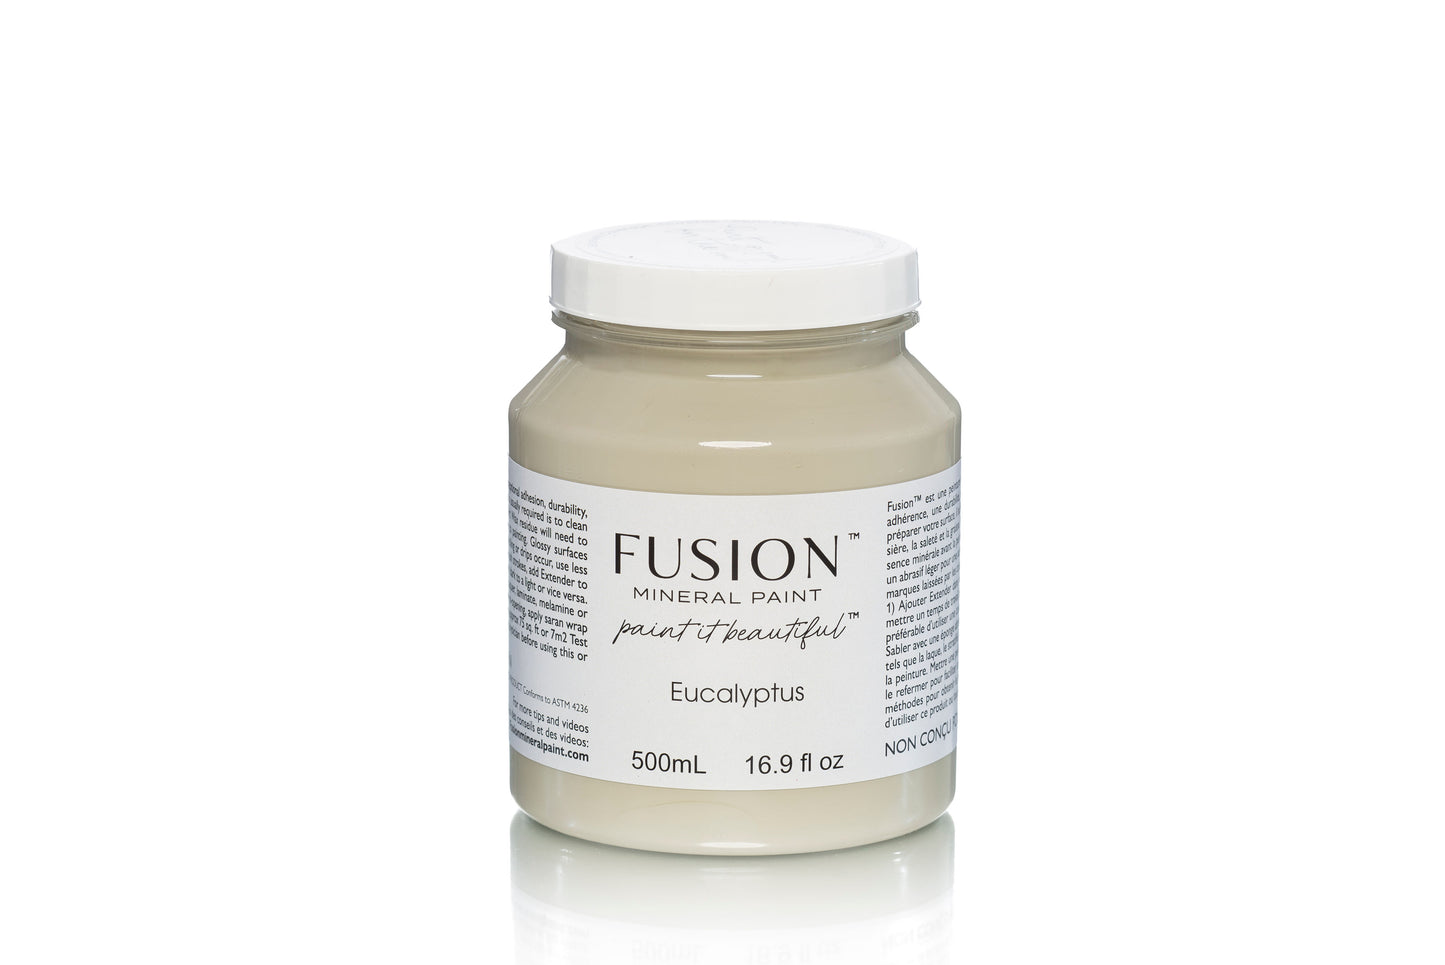 Eucalyptus Fusion Mineral Paint, Muted Grey Paint Color| 500ml Pint Size